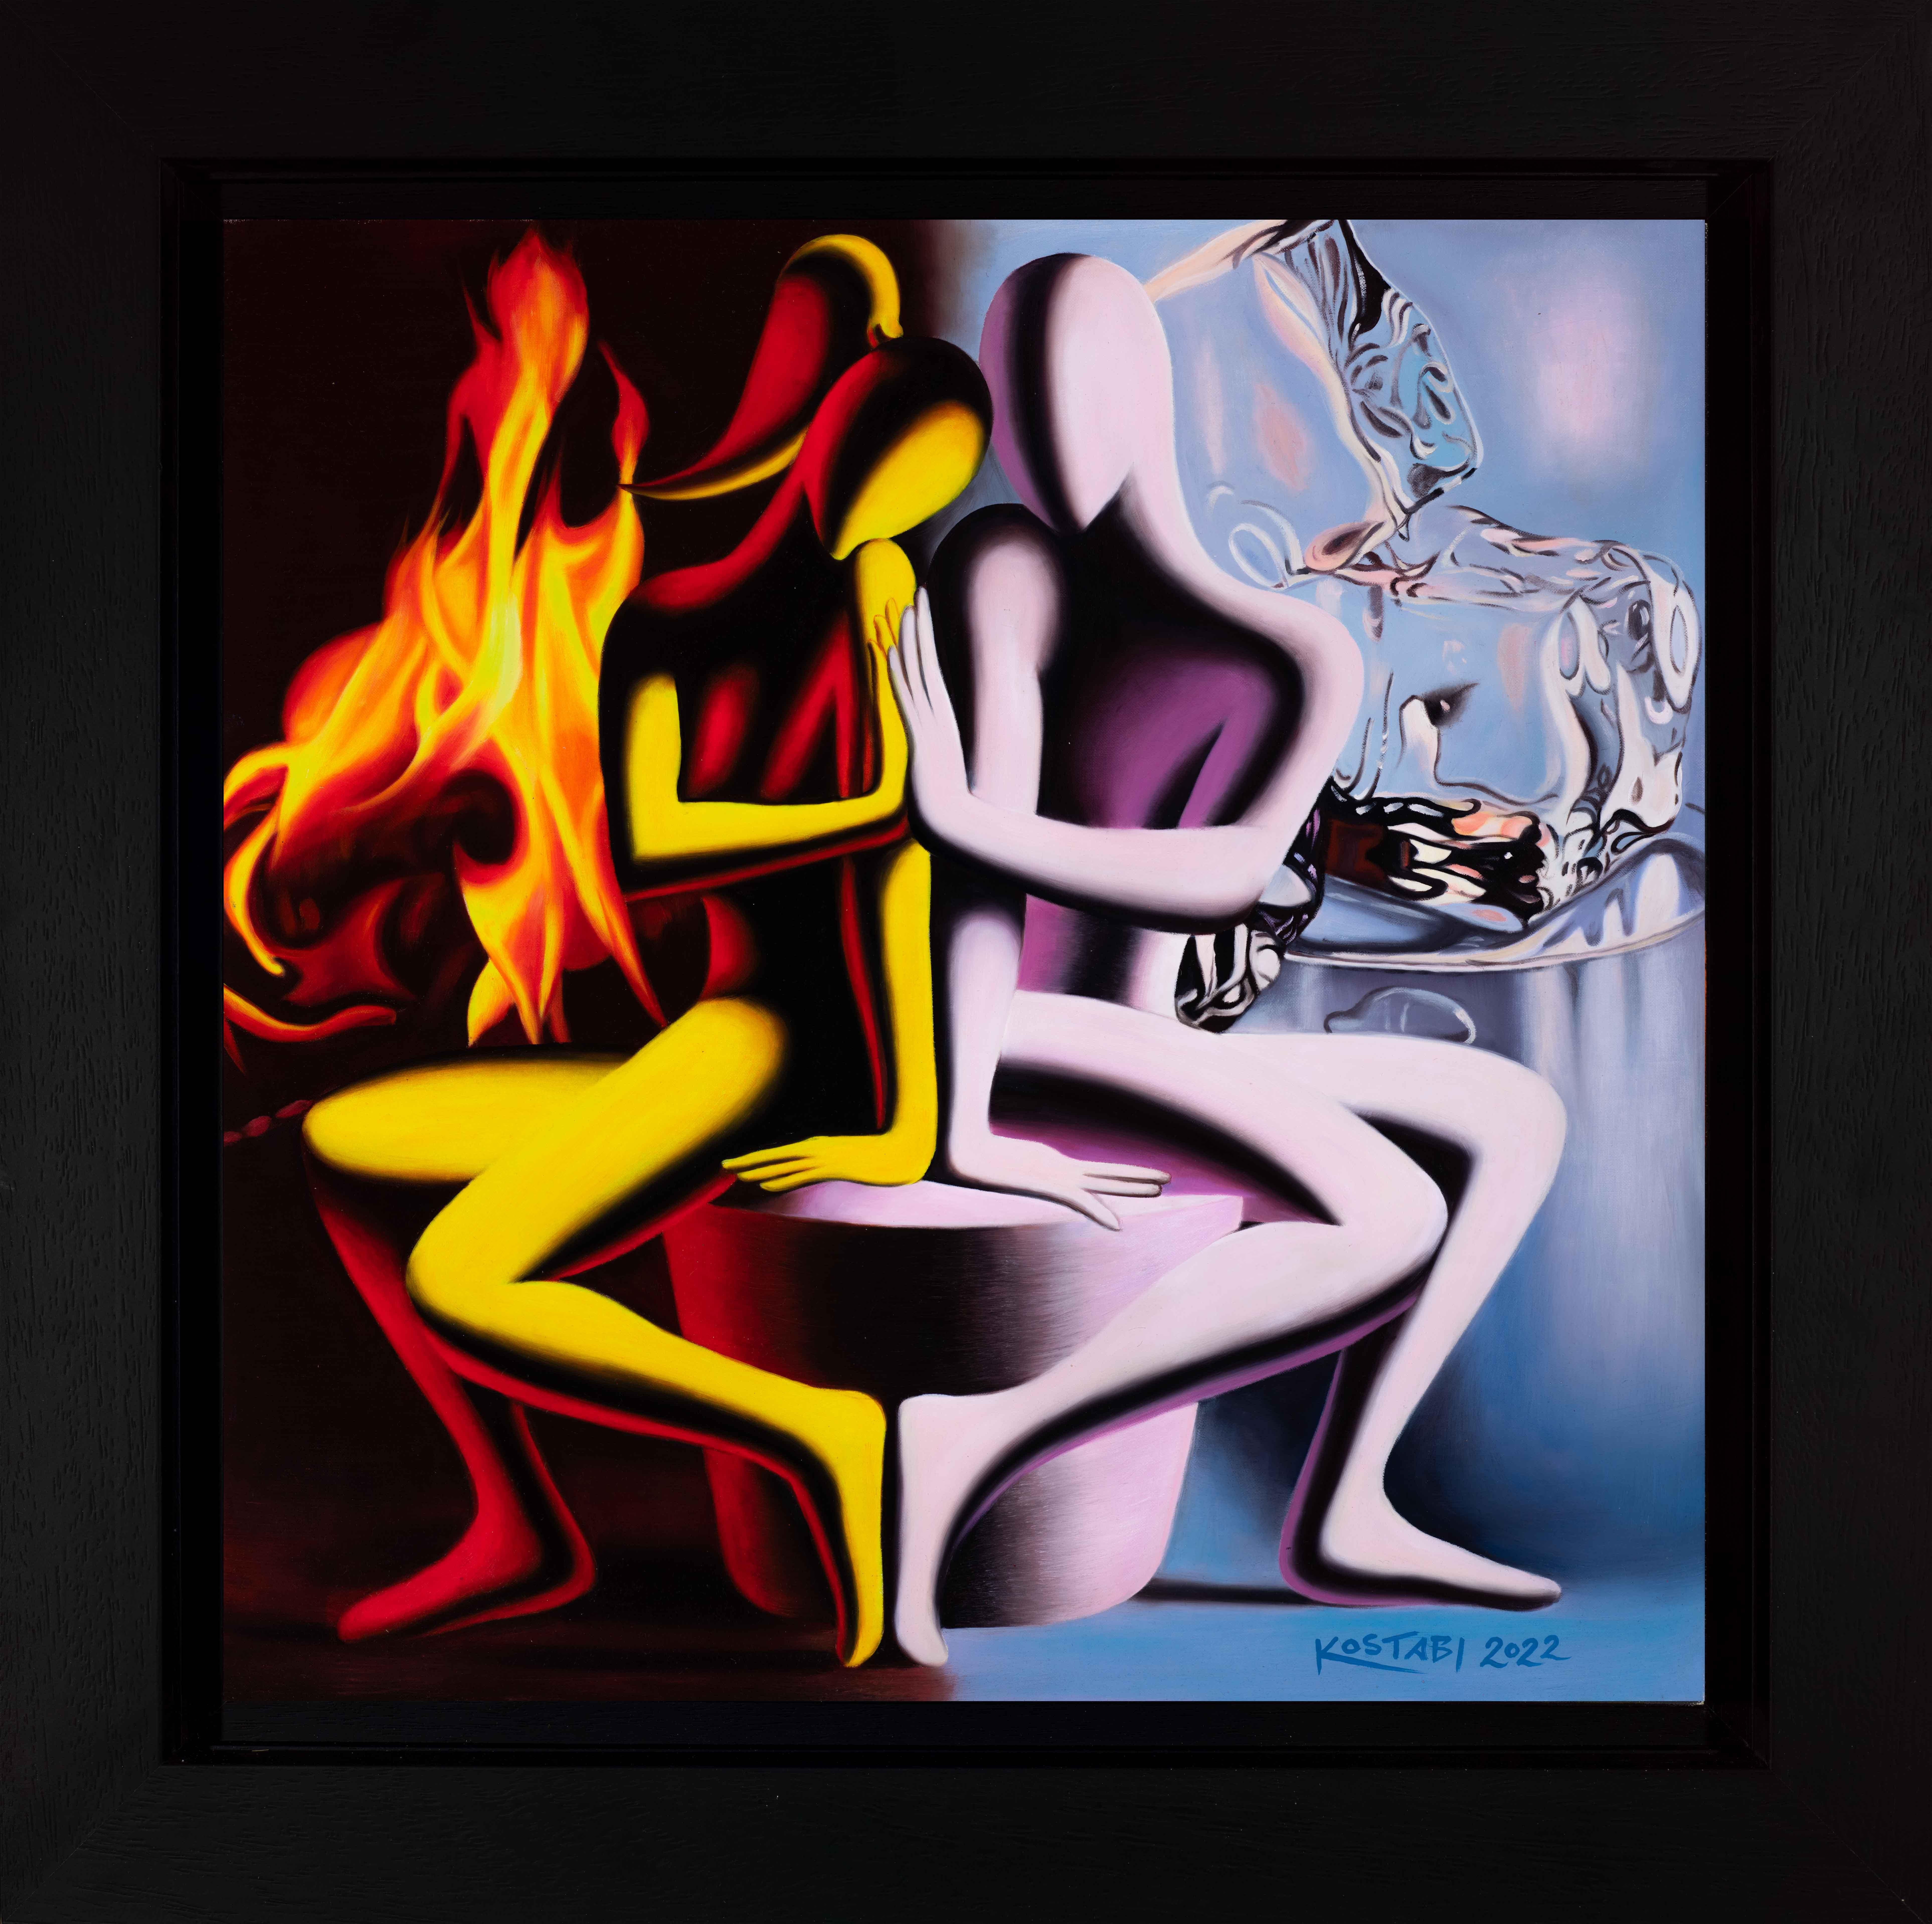 Opposites Attract, 2022 - Painting by Mark Kostabi